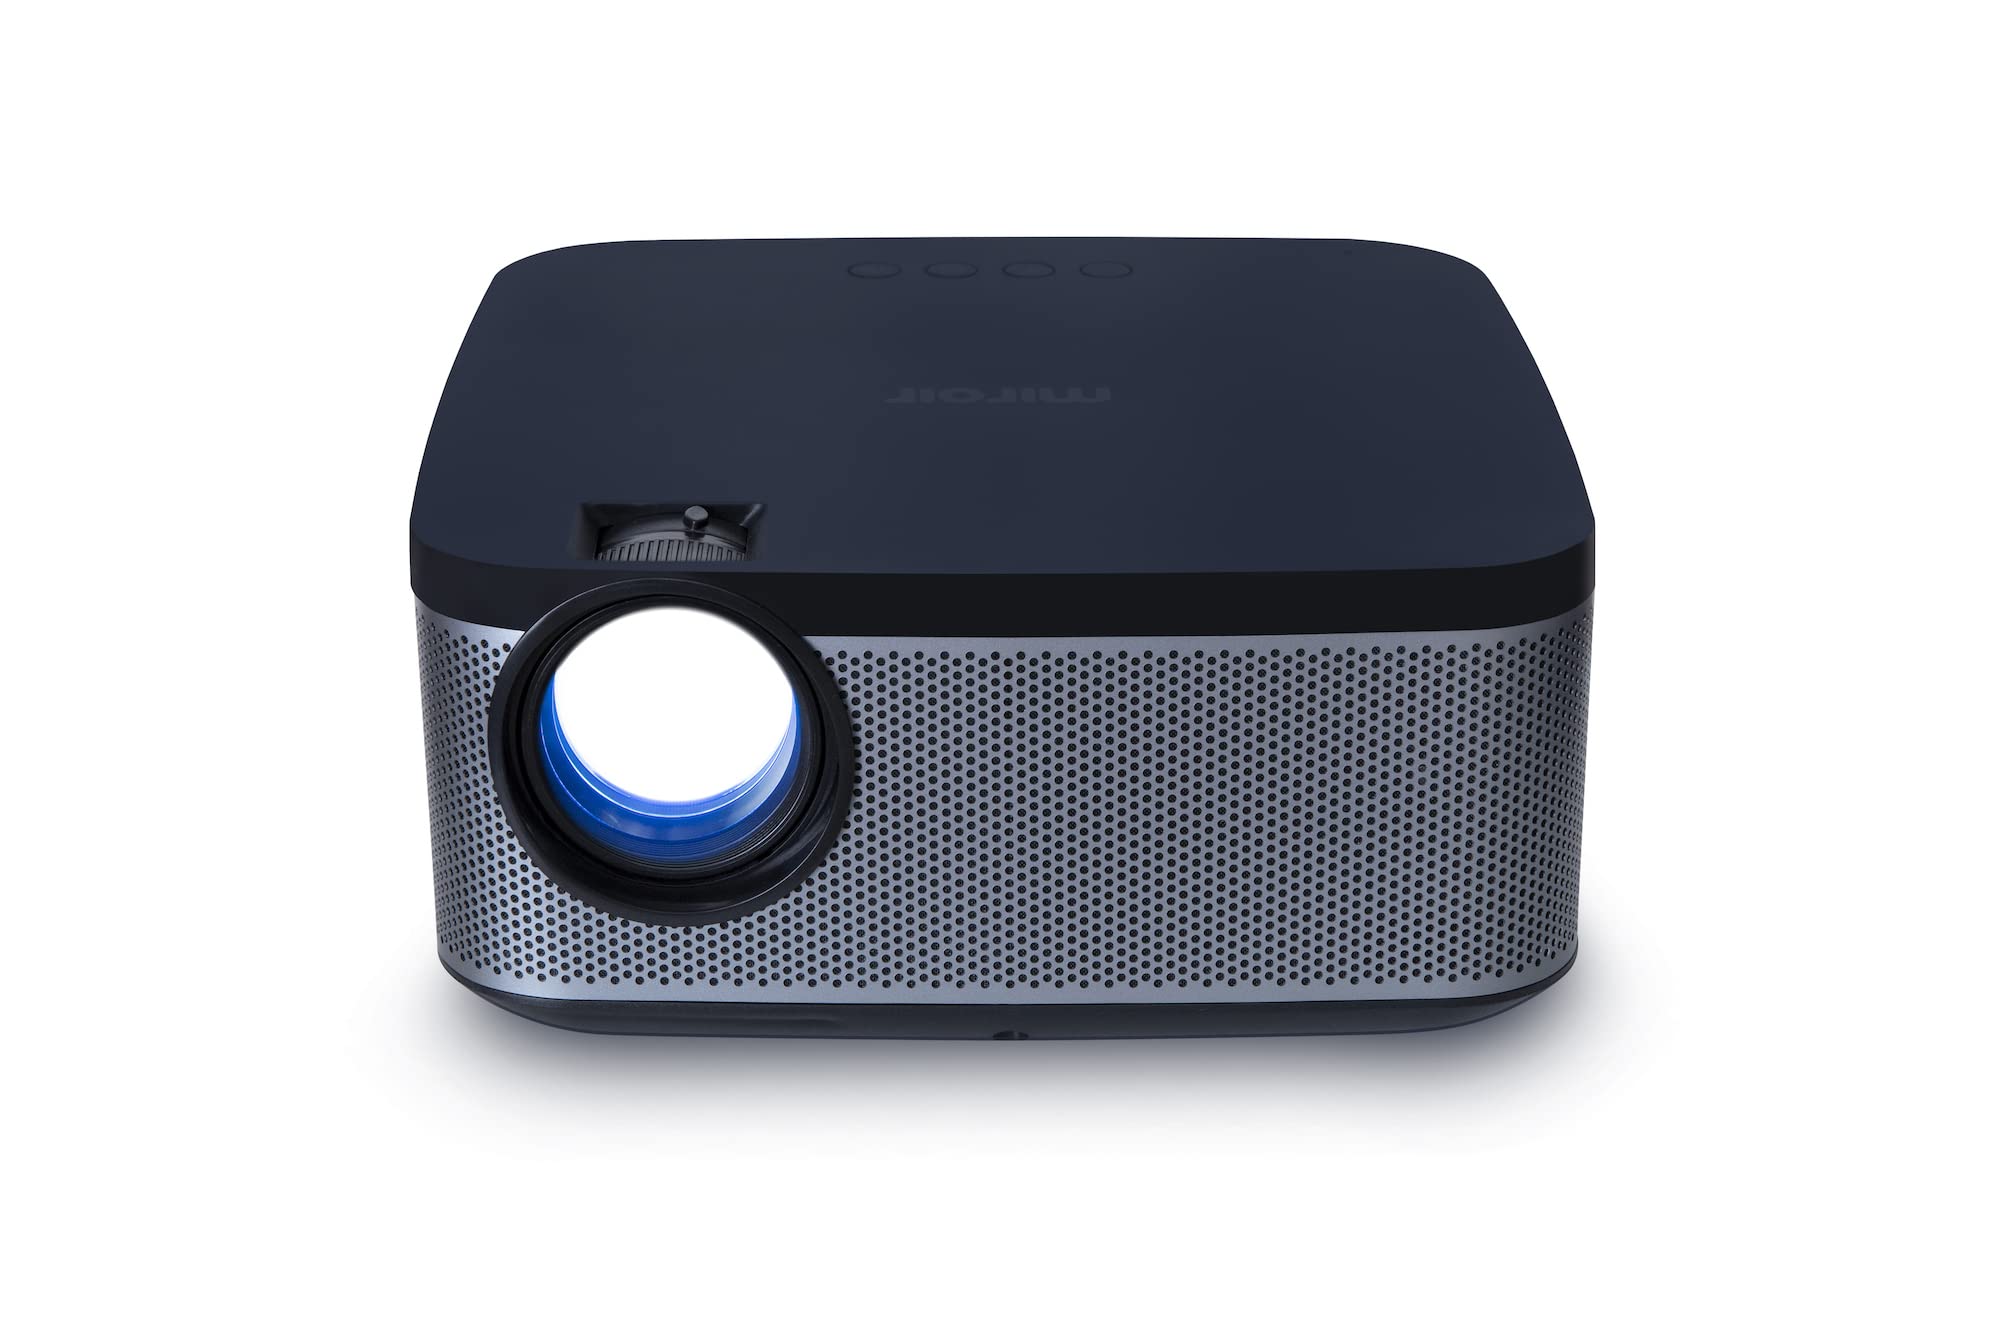 Miroir L300 1080p (Native Resolution) Full HD LCD Portable Projector, Built-in Speaker, LED Lamp, 2x HDMI